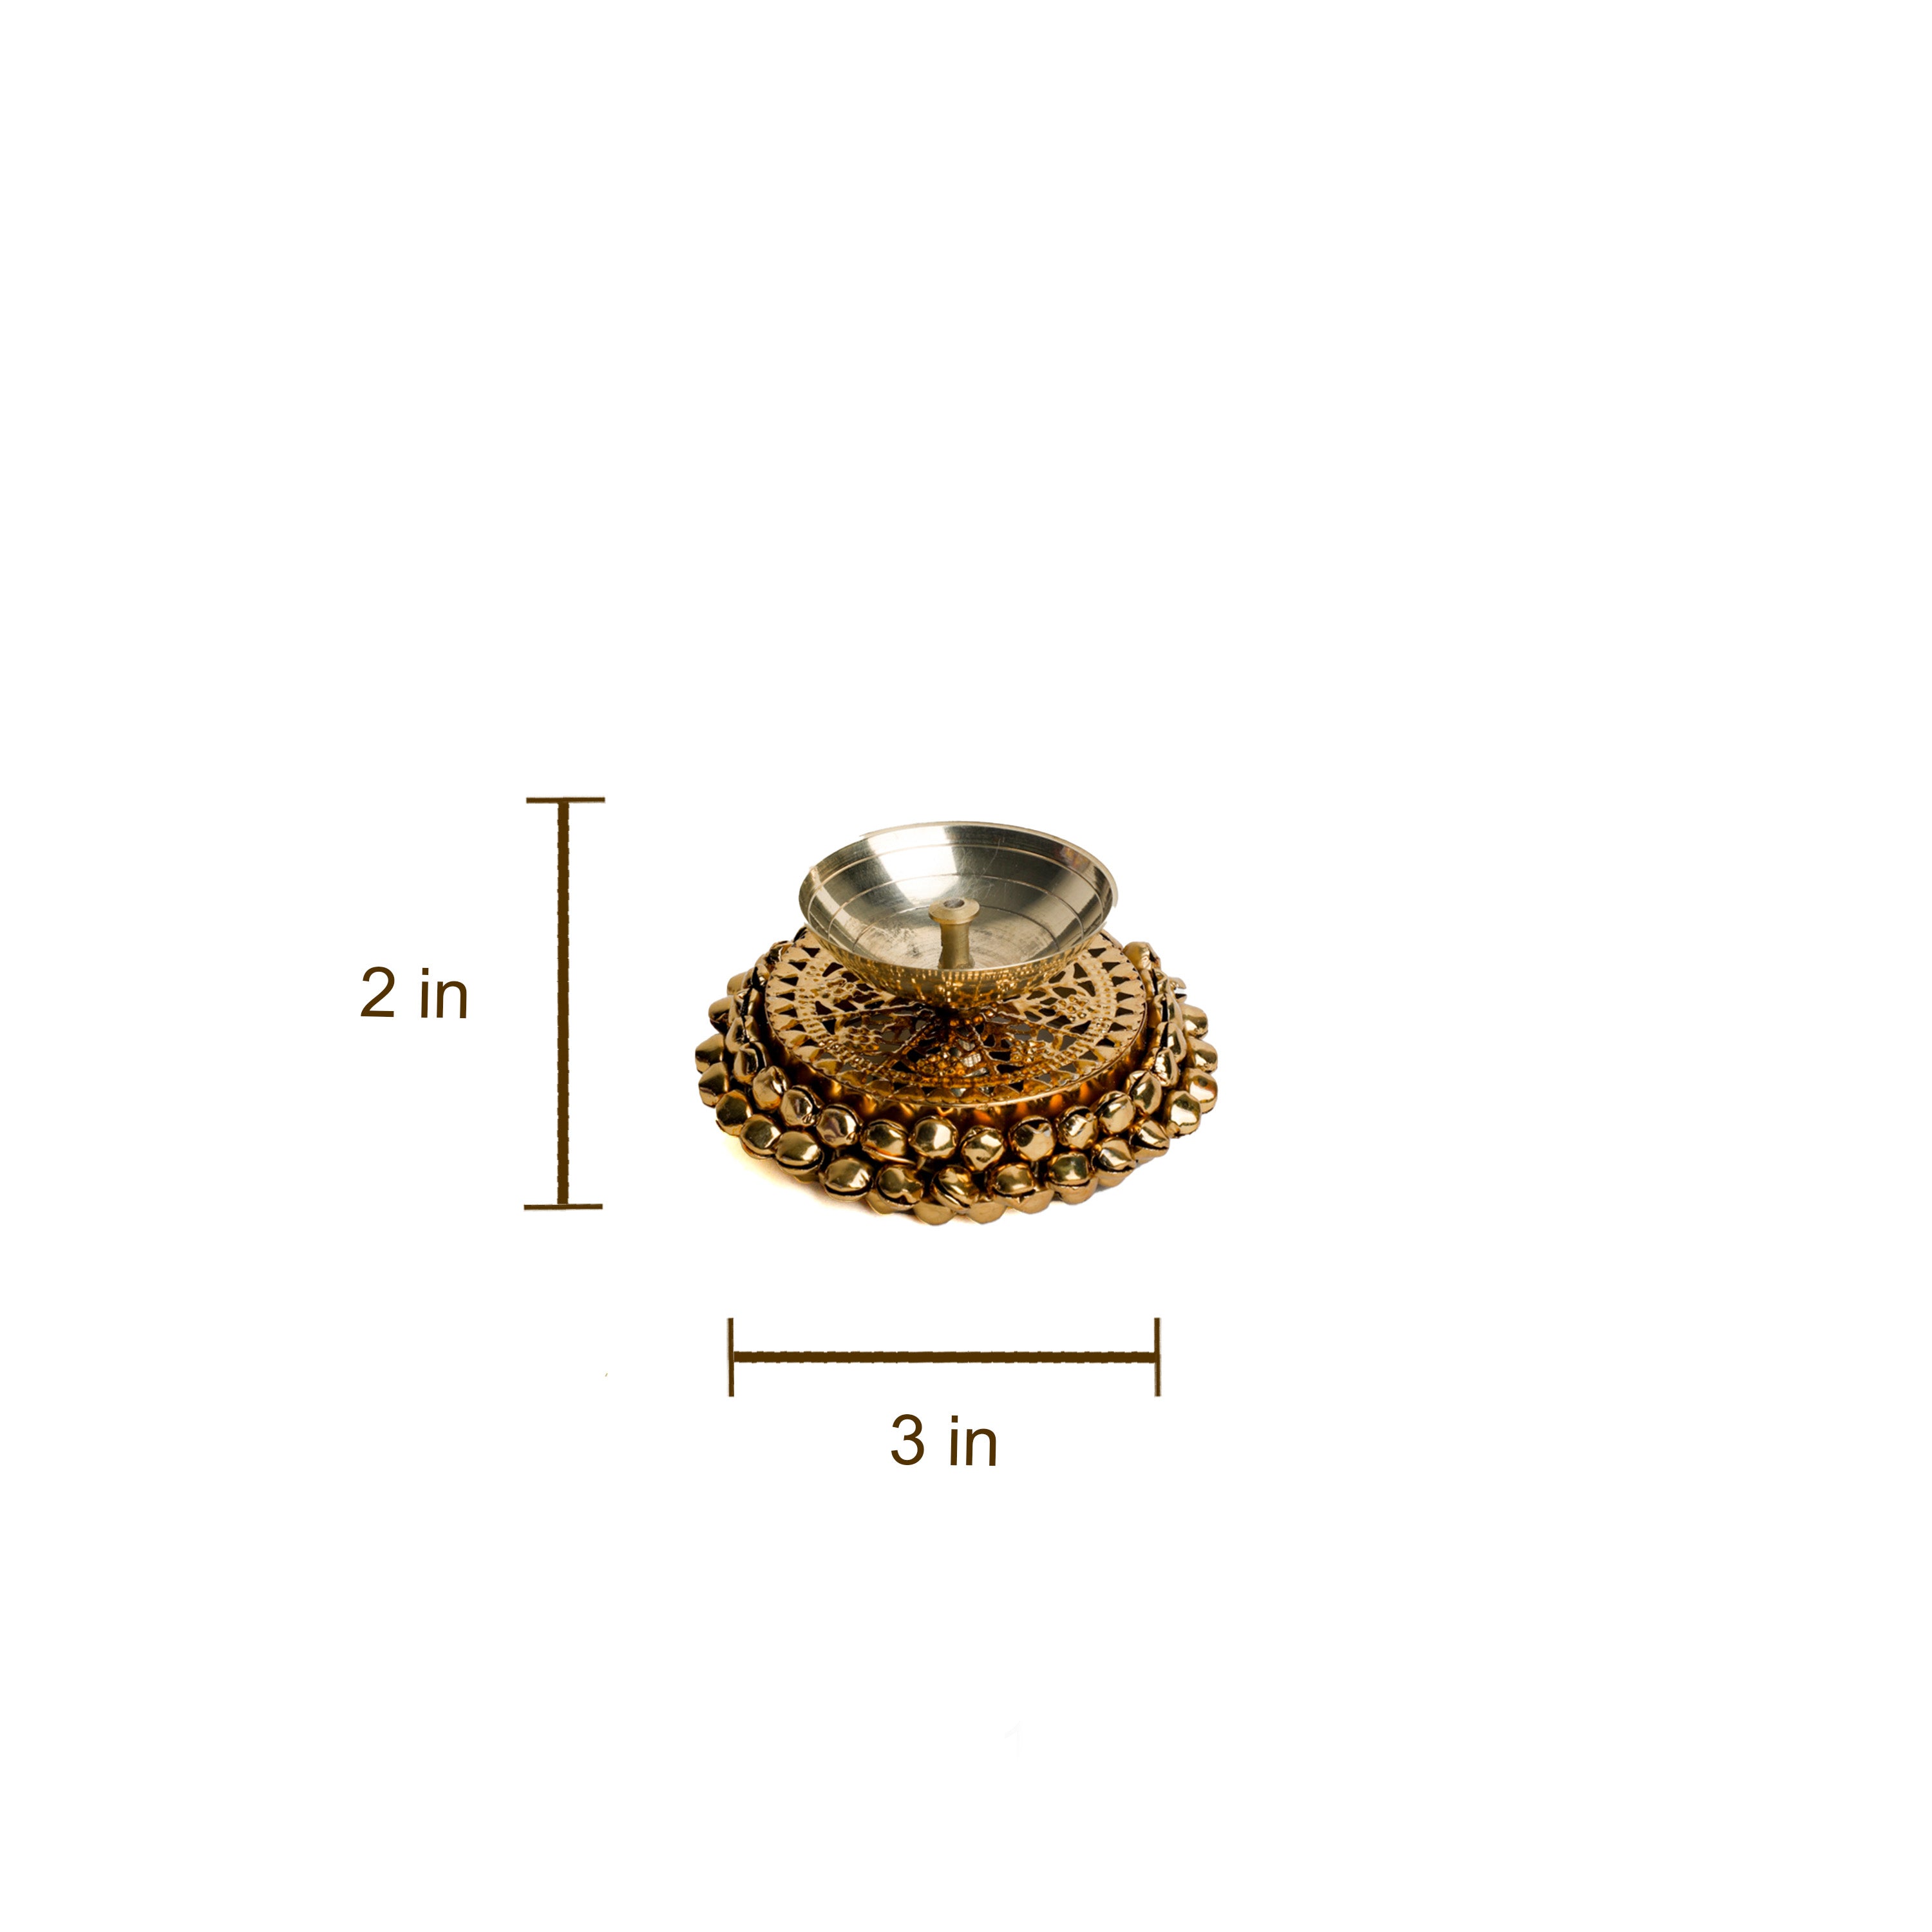 Sitting on top of the curved ghungroo, this diya is a classic